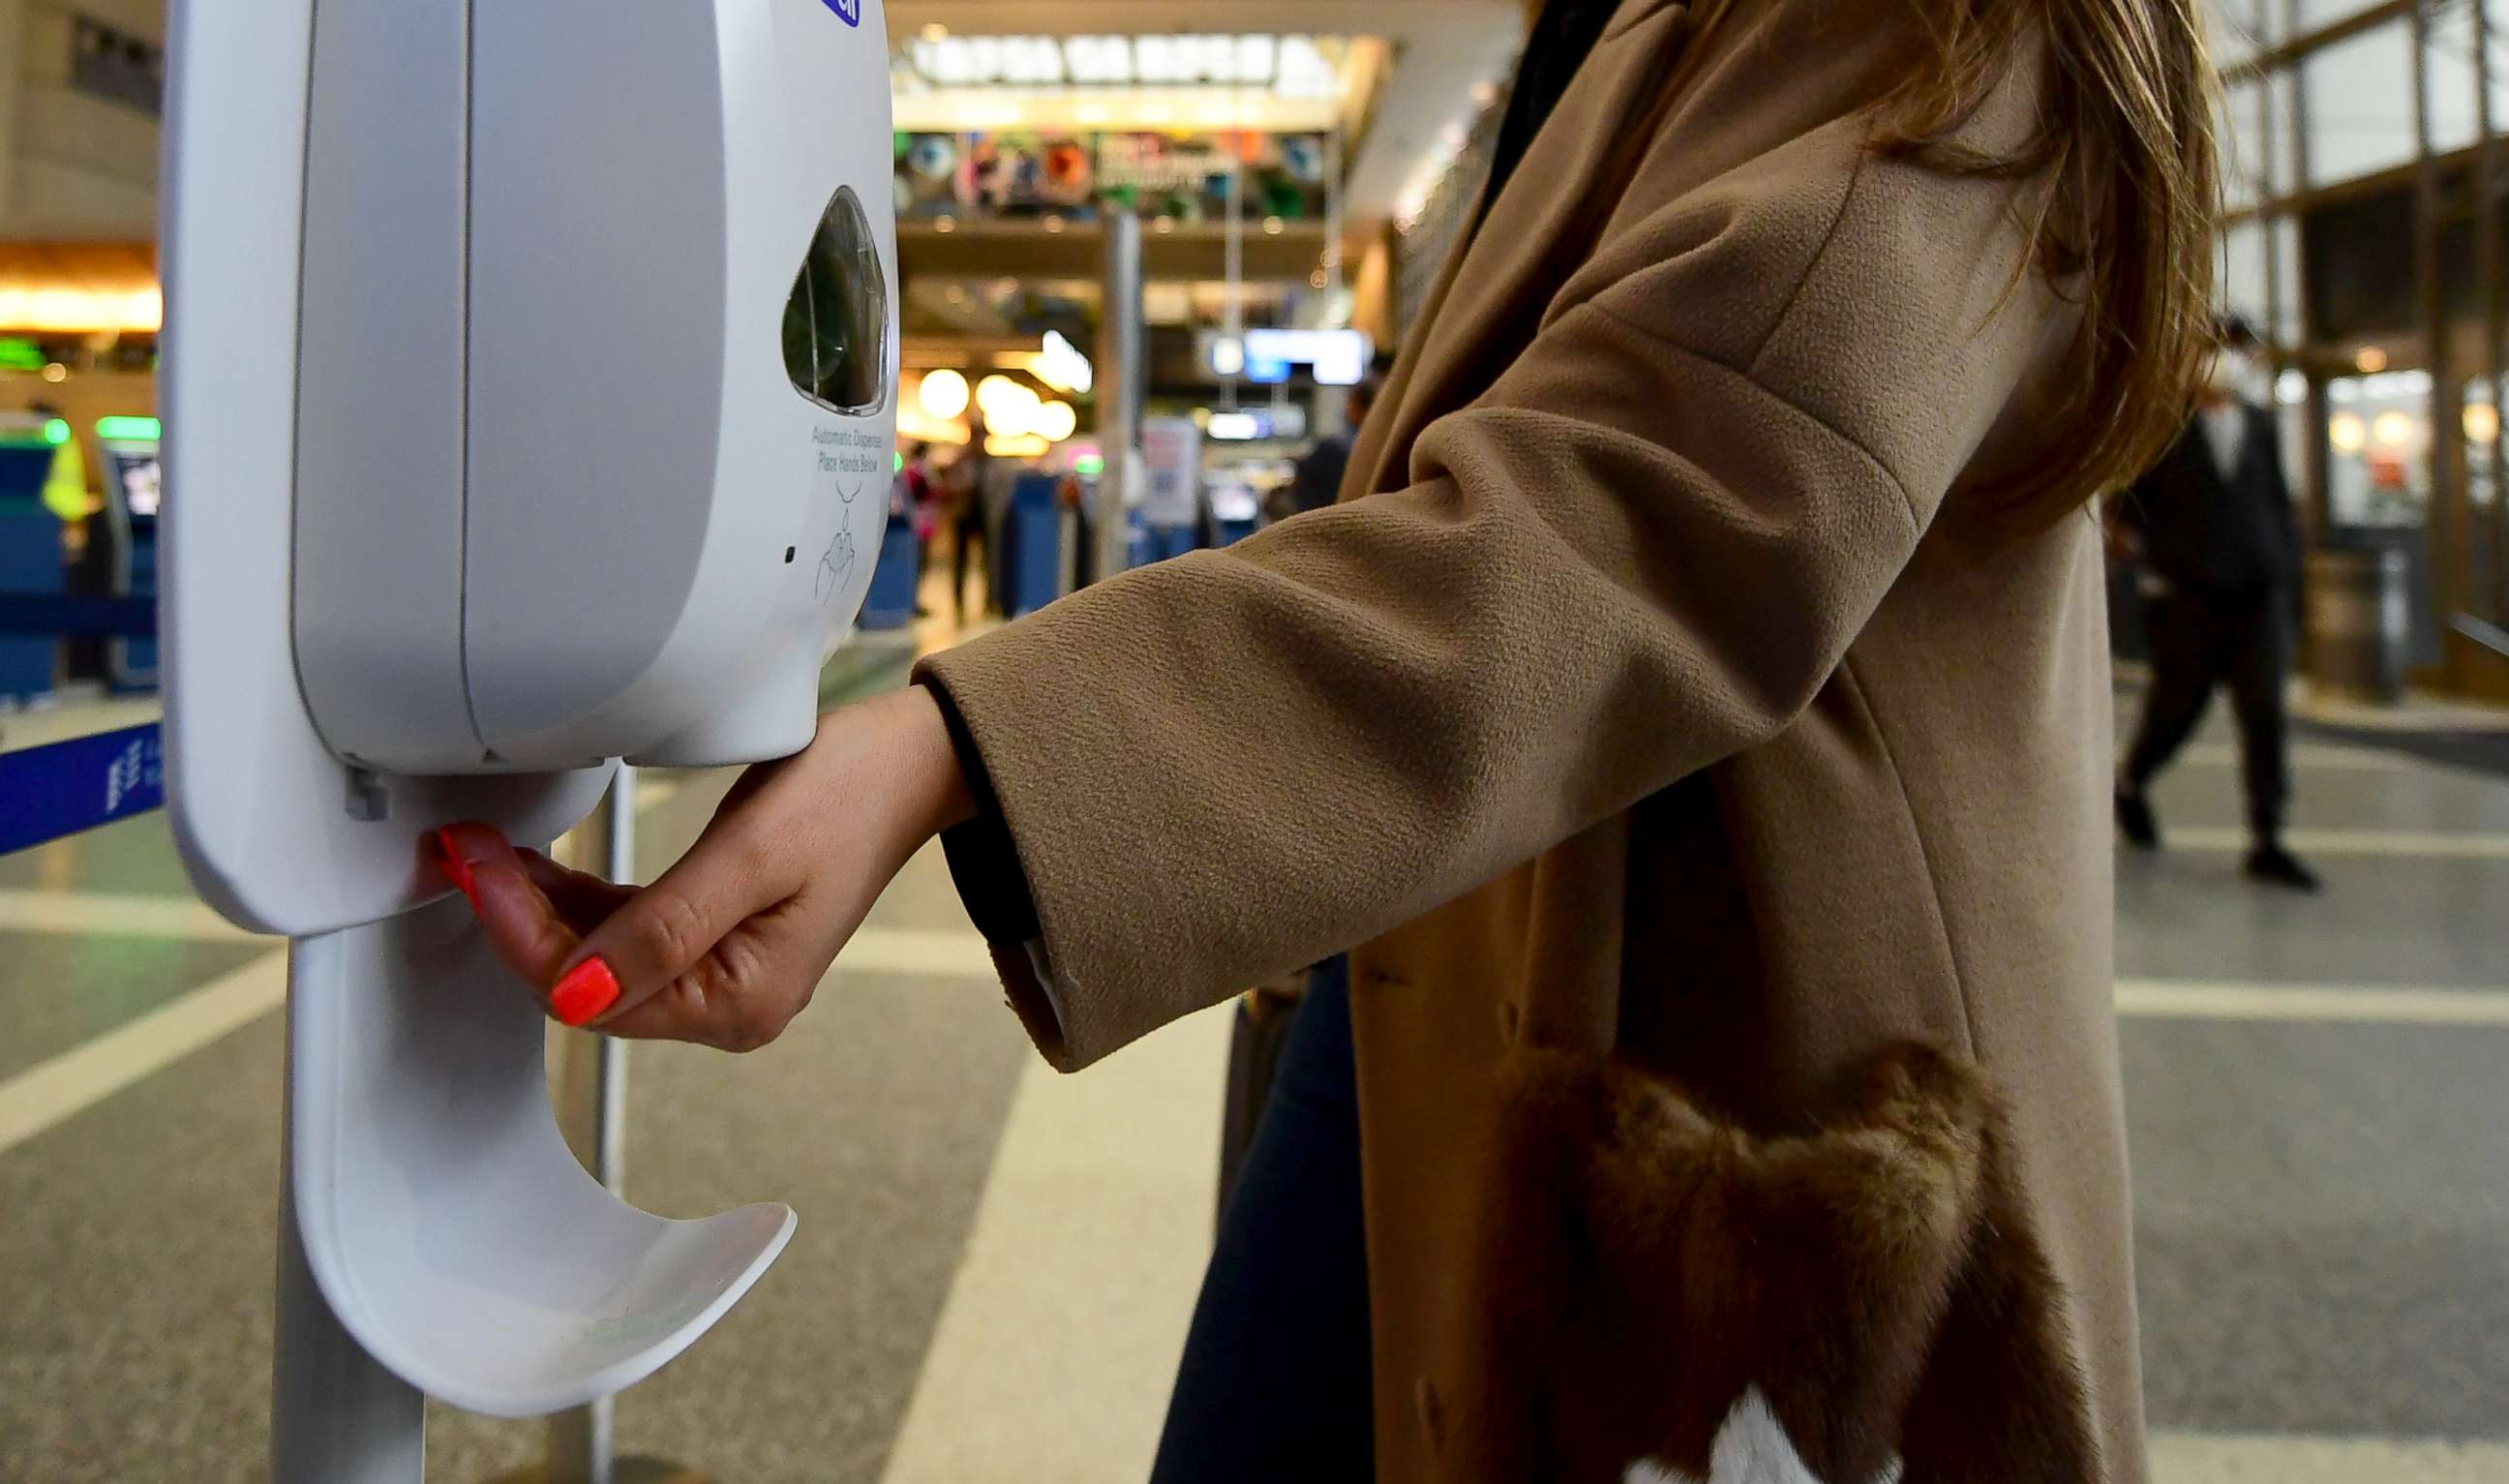 PHOTO: A woman uses hand sanitizer at Los Angeles International Airport, March 12, 2020, one day before a US flight travel ban hits 26 European countries amid ongoing precautions over the Coronavirus.